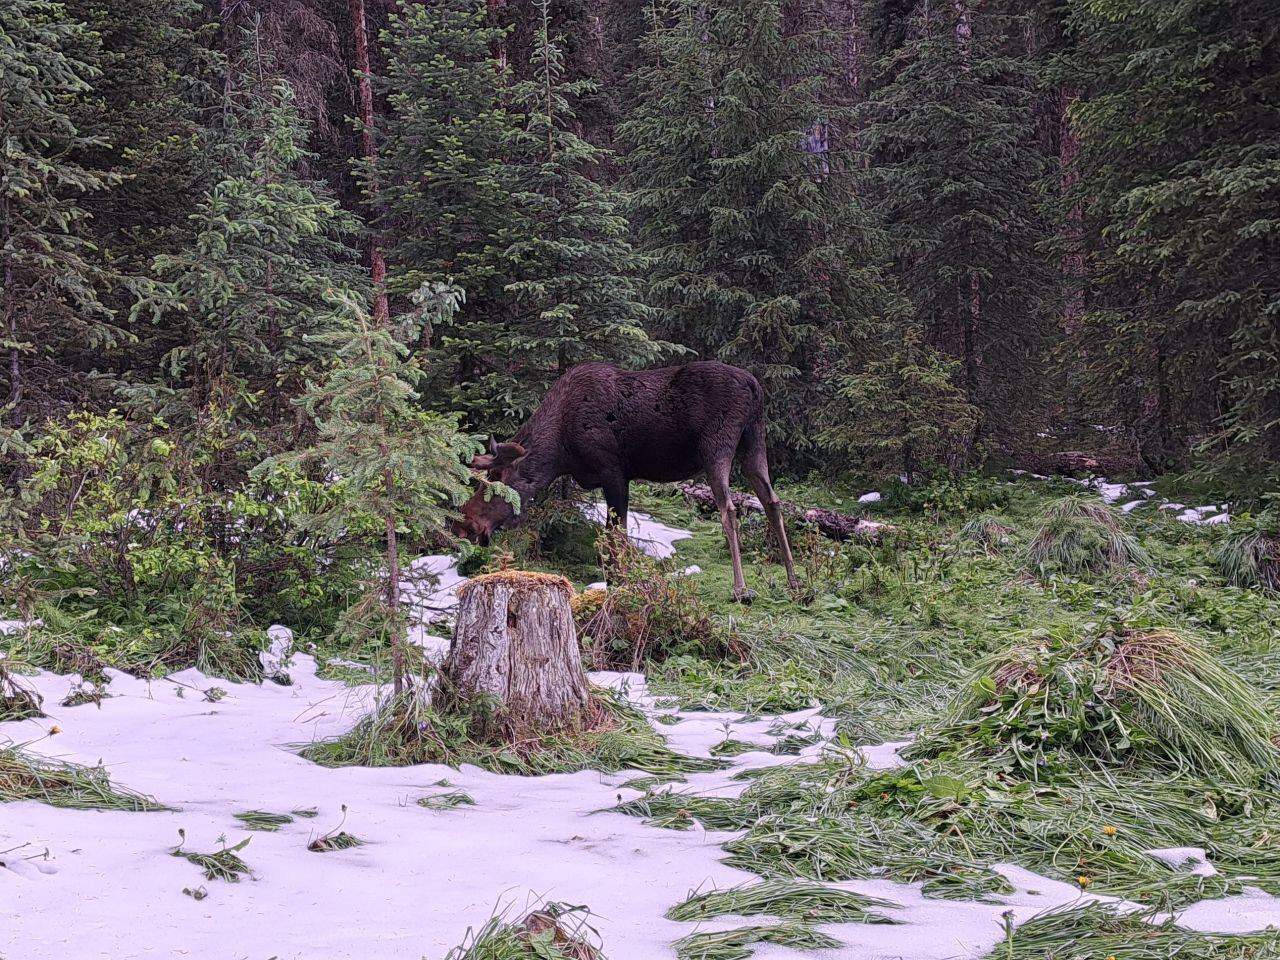 A moose eats breakfast next to some campers at the Jacques Lake Campground in Jasper National Park